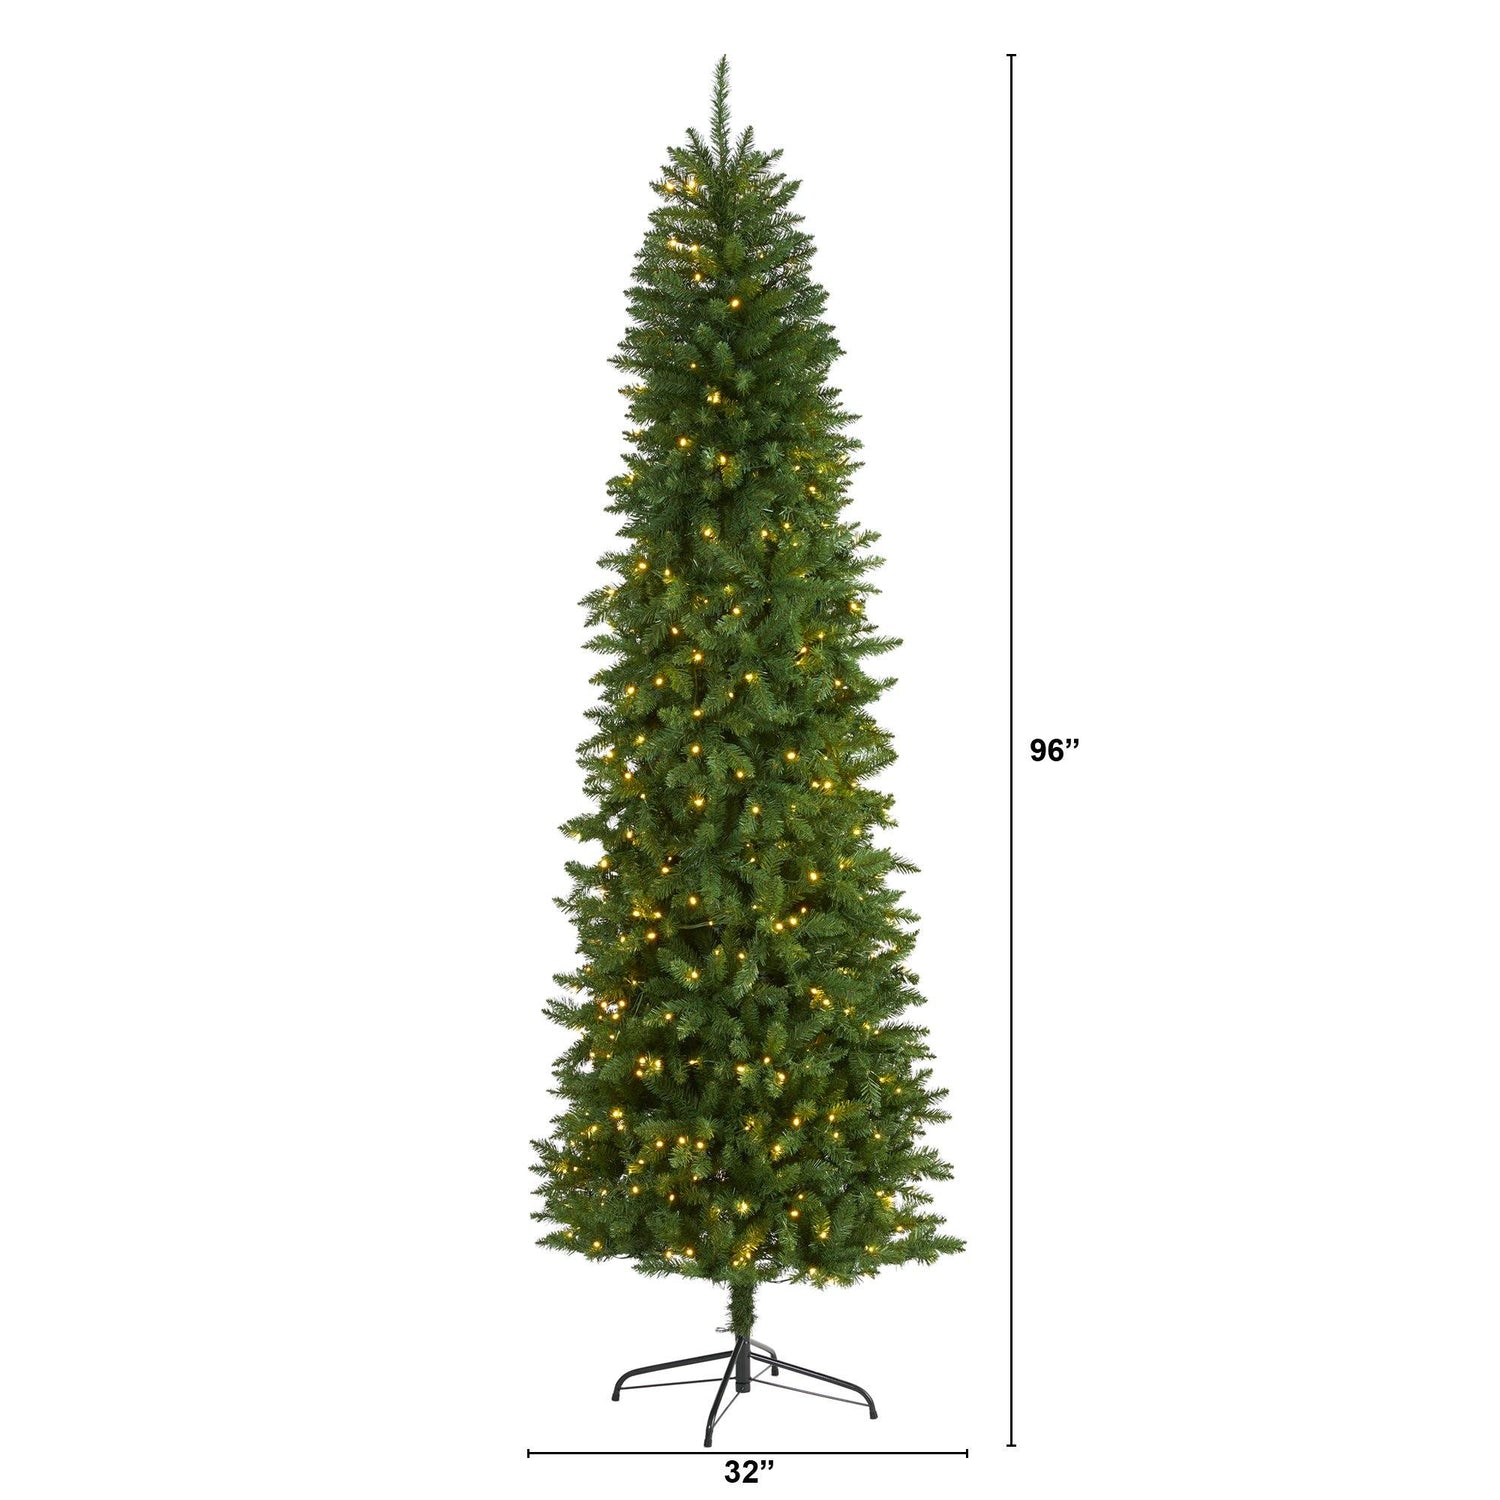 8’ Slim Green Mountain Pine Artificial Christmas Tree with 400 Clear LED Lights